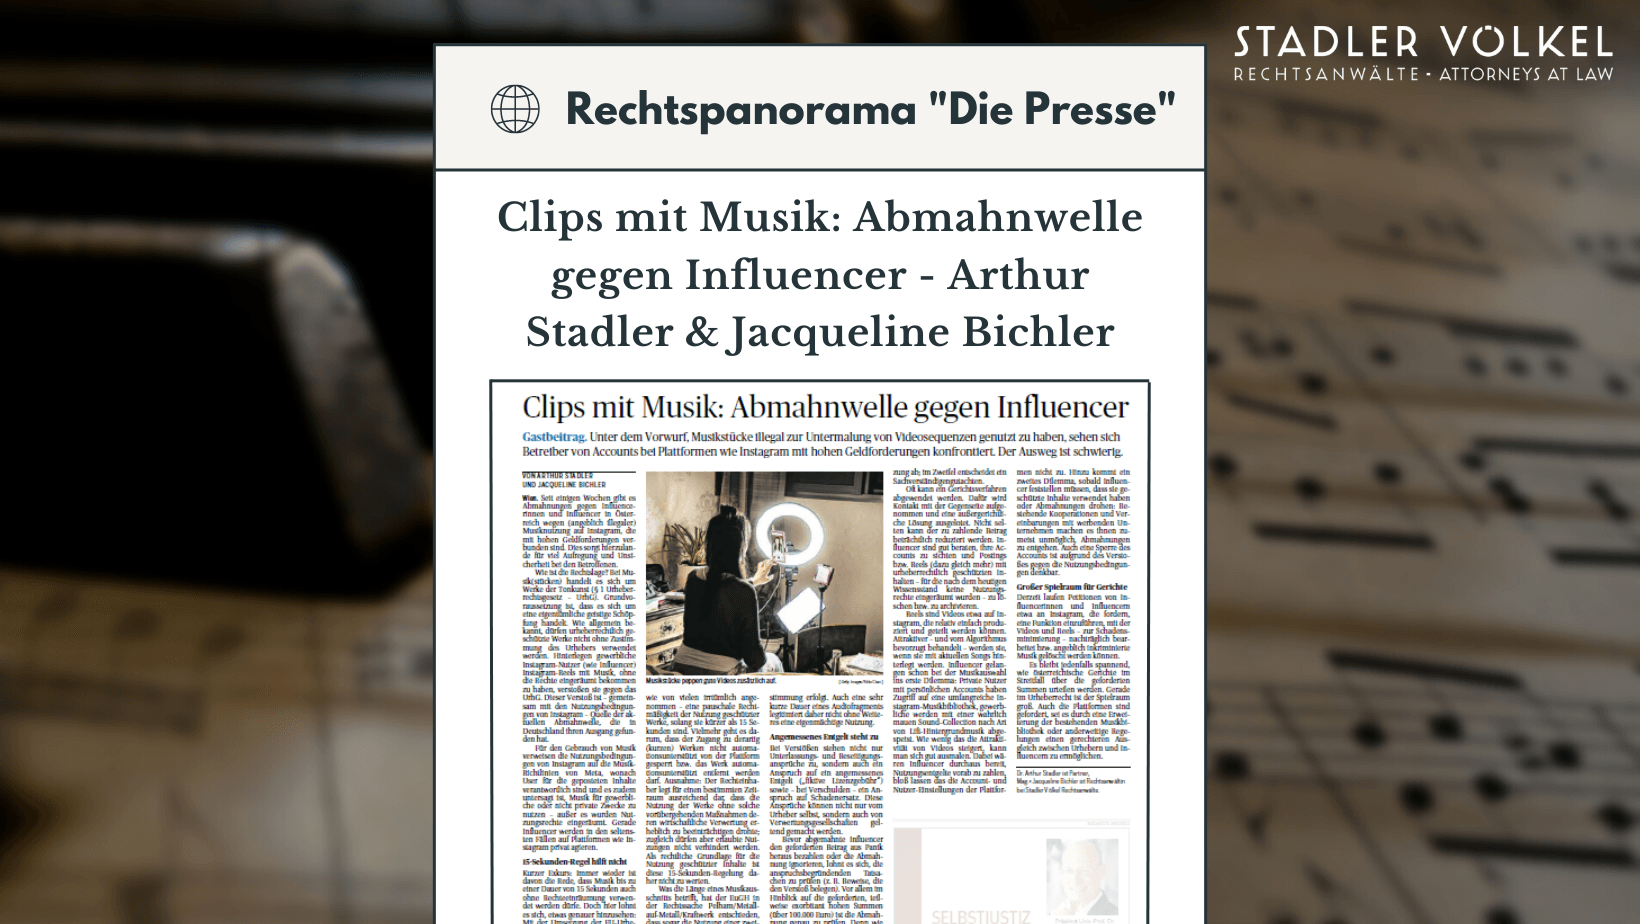 Arthur Stadler and Jacqueline Bichler in the legal panorama of "Die Presse"